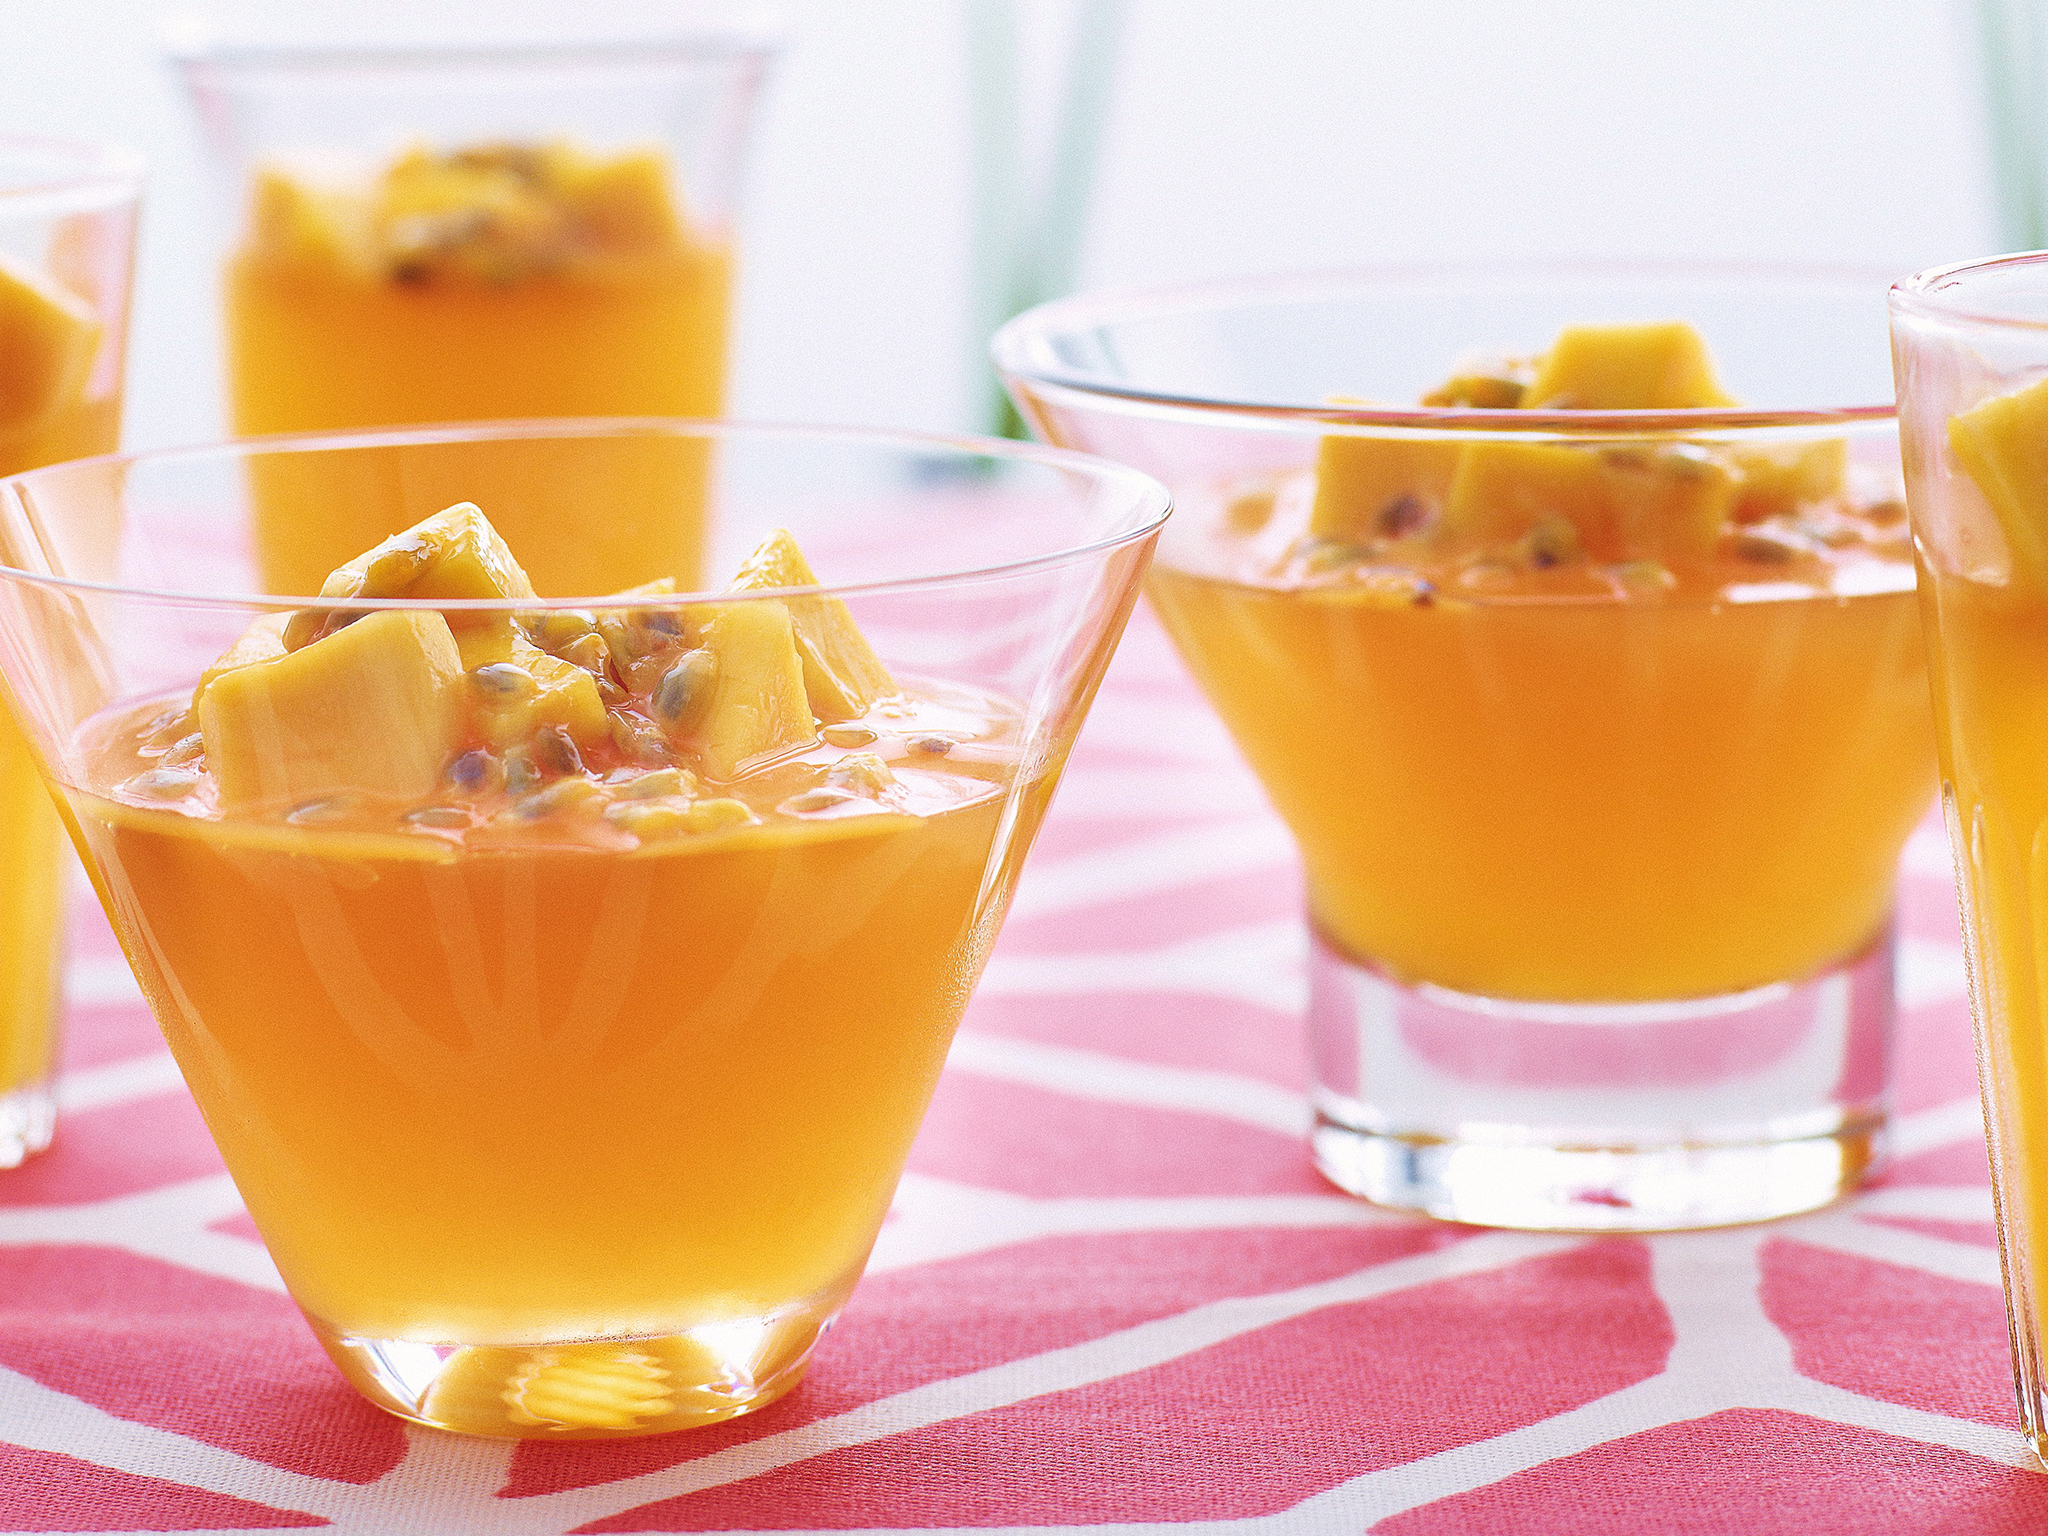 Passionfruit jelly with mango